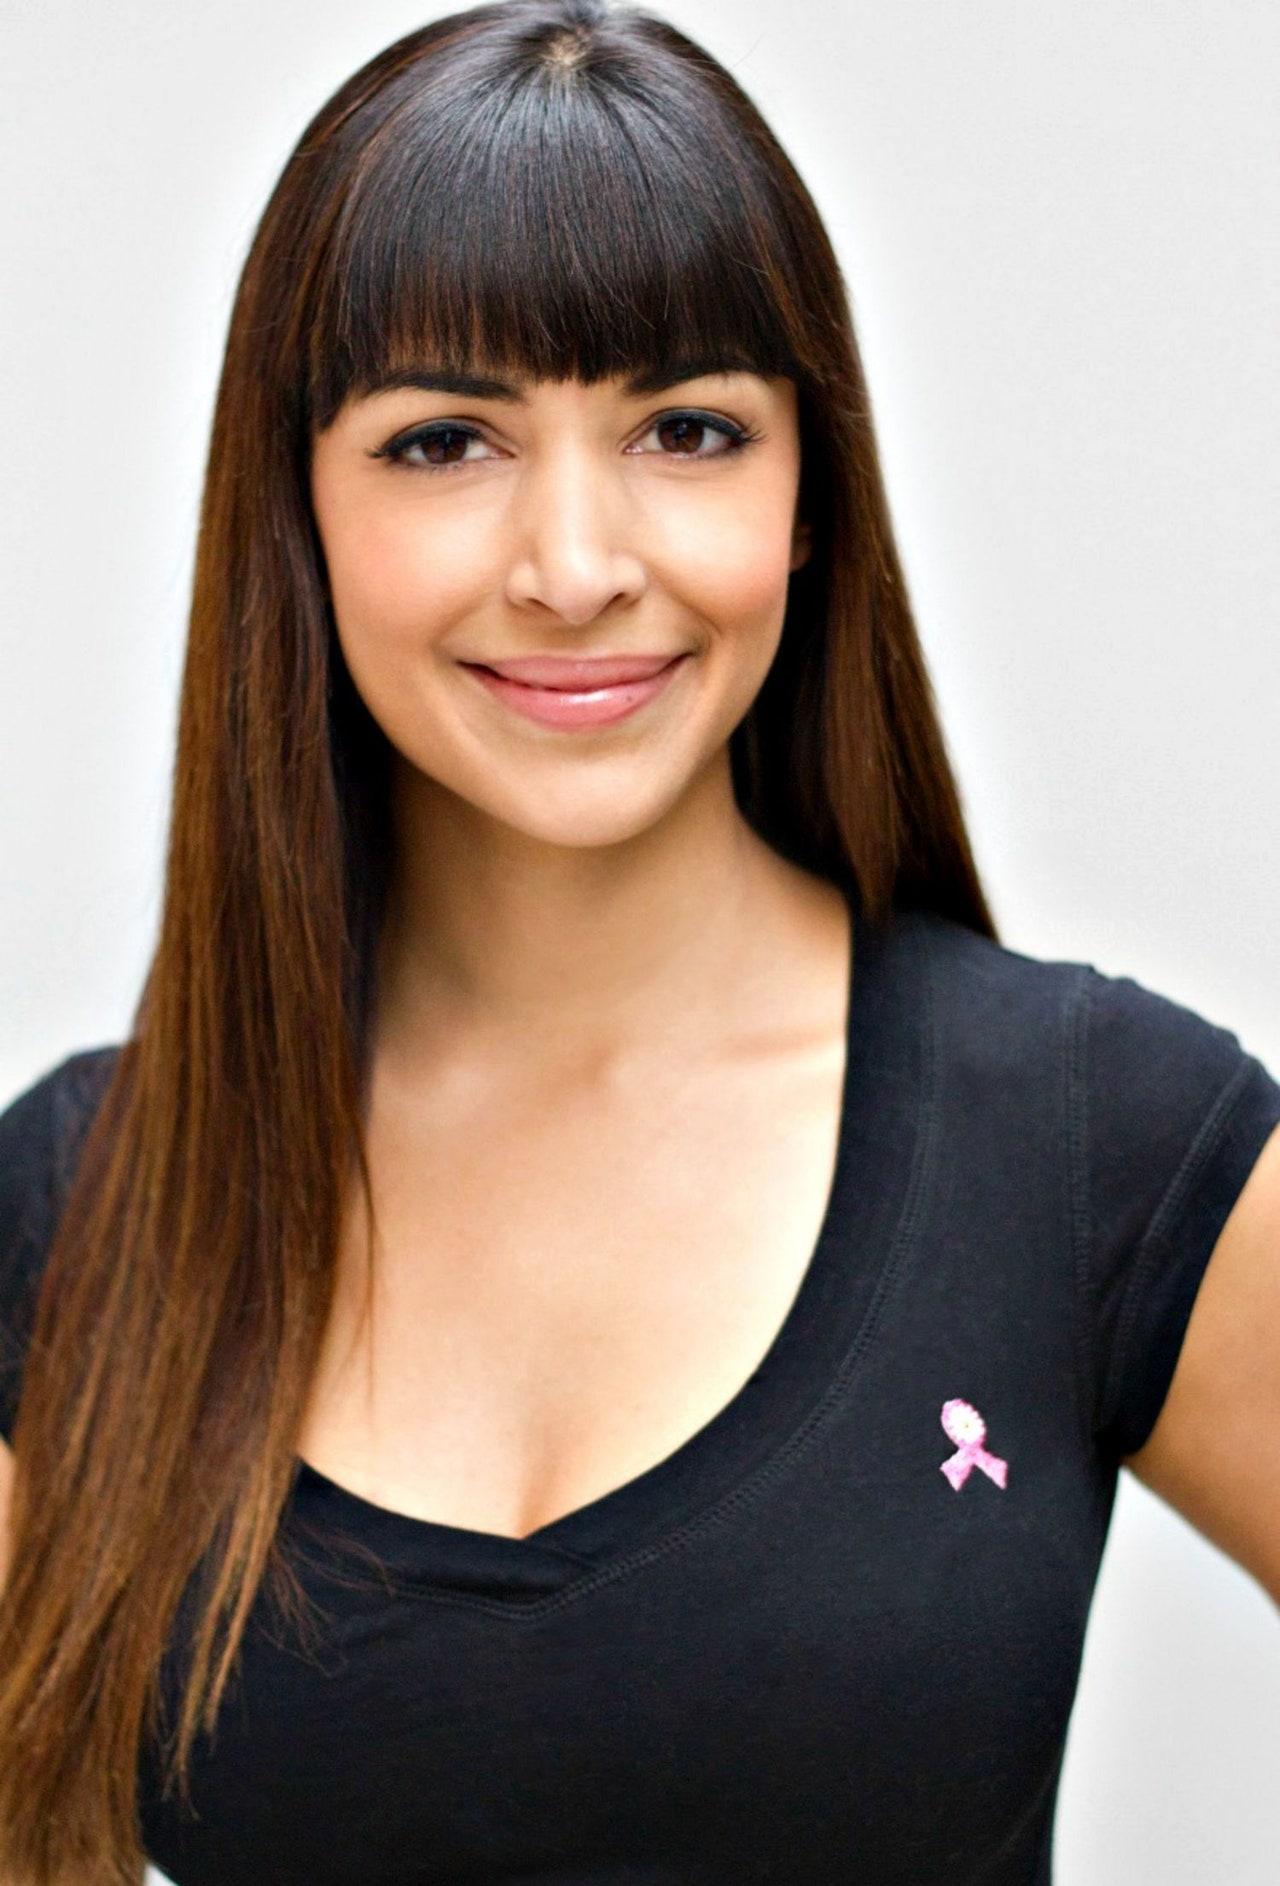 70+ Hot Pictures Of Hannah Simone Are Sexy As Hell 253